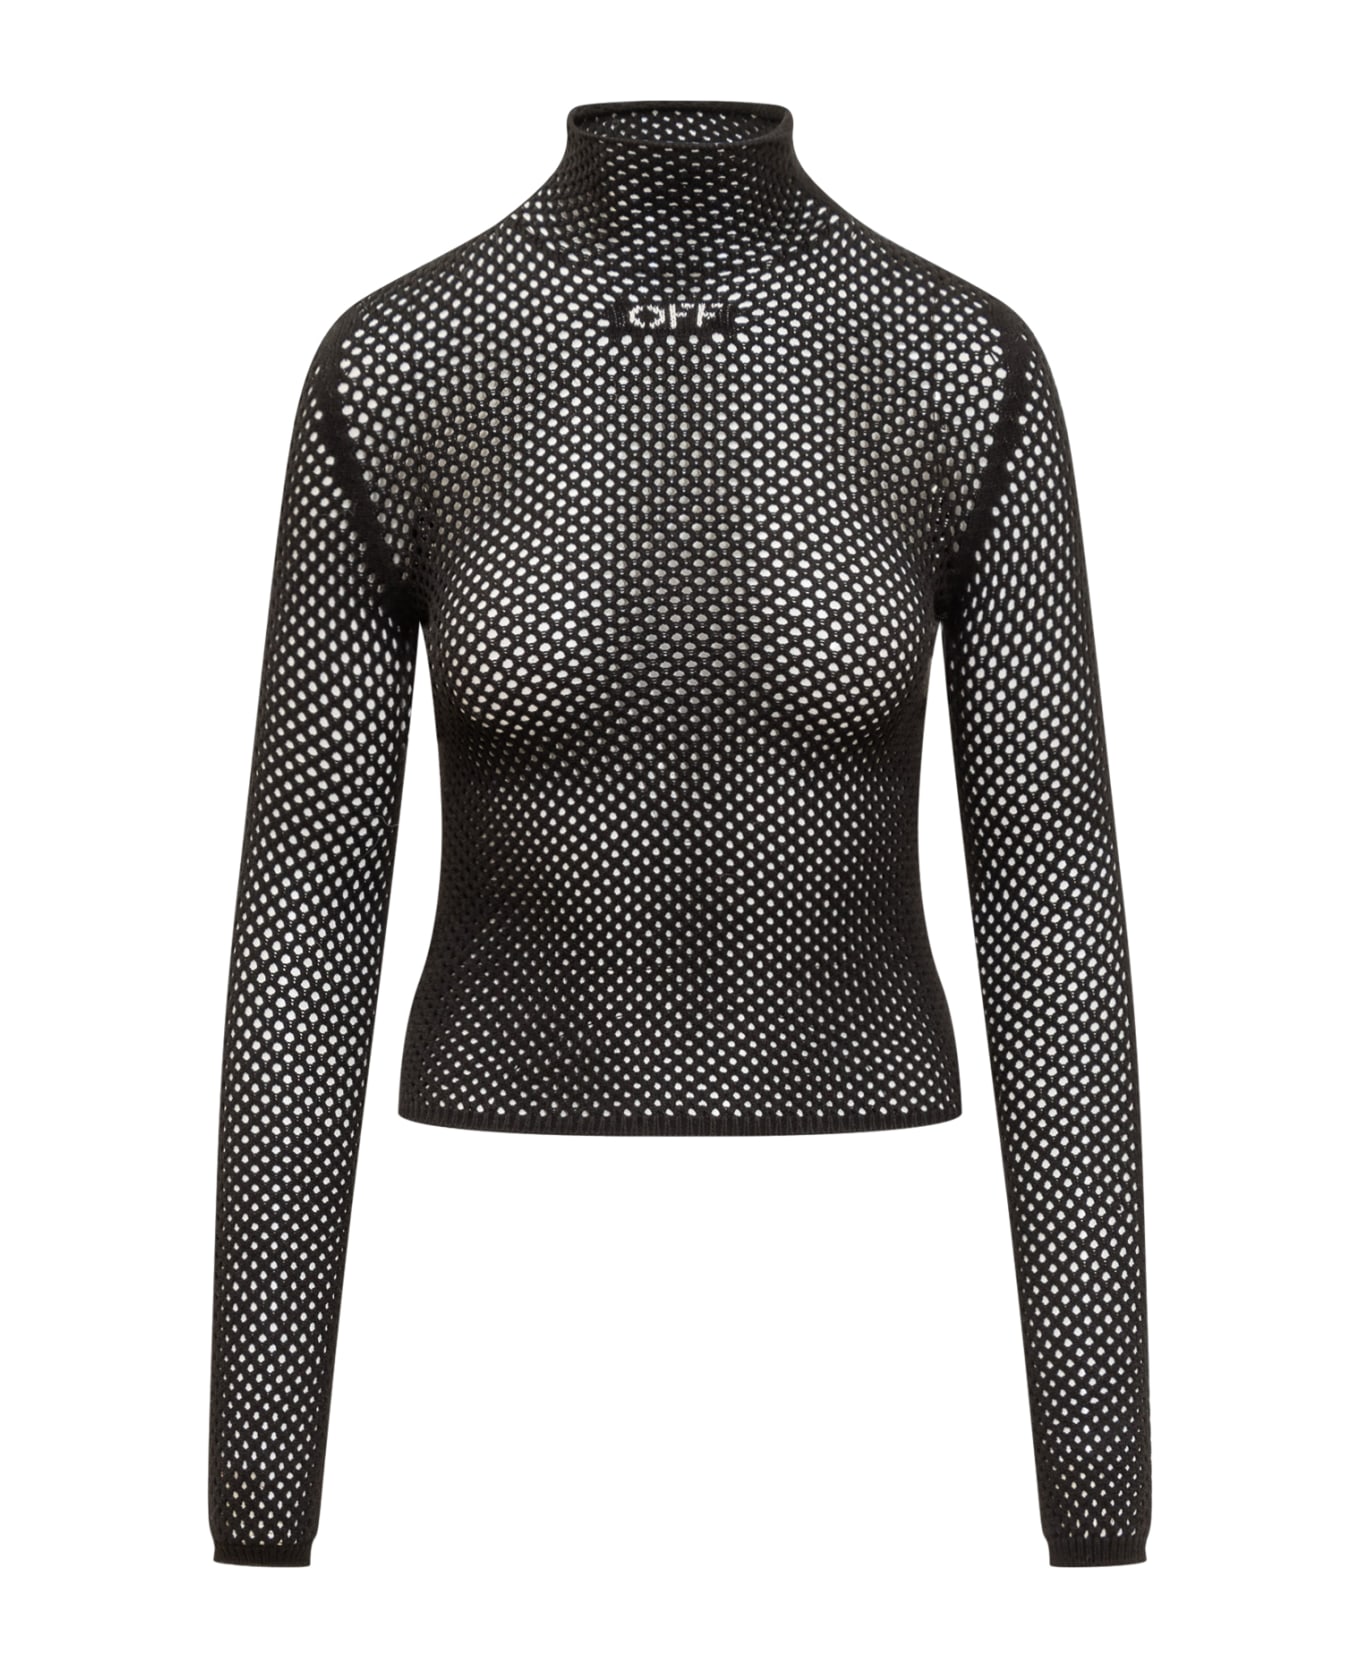 Off-White Viscose Blend Mesh Top With Logo - BLACK/WHITE